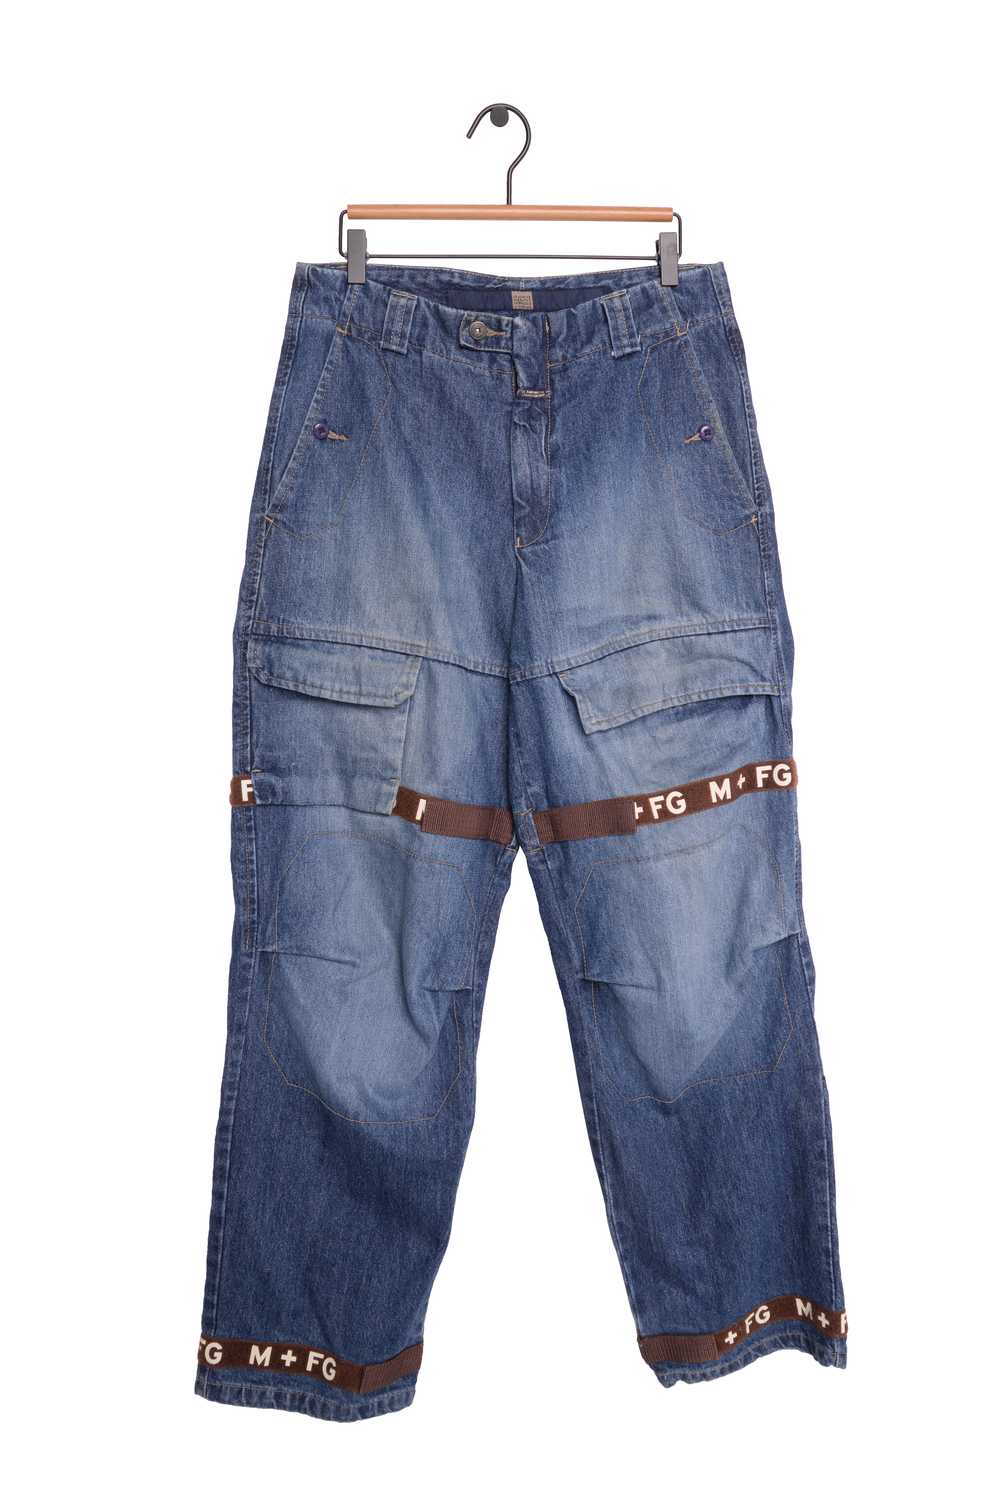 1990s Faded Girbaud Cargo Jeans 46497 - image 1